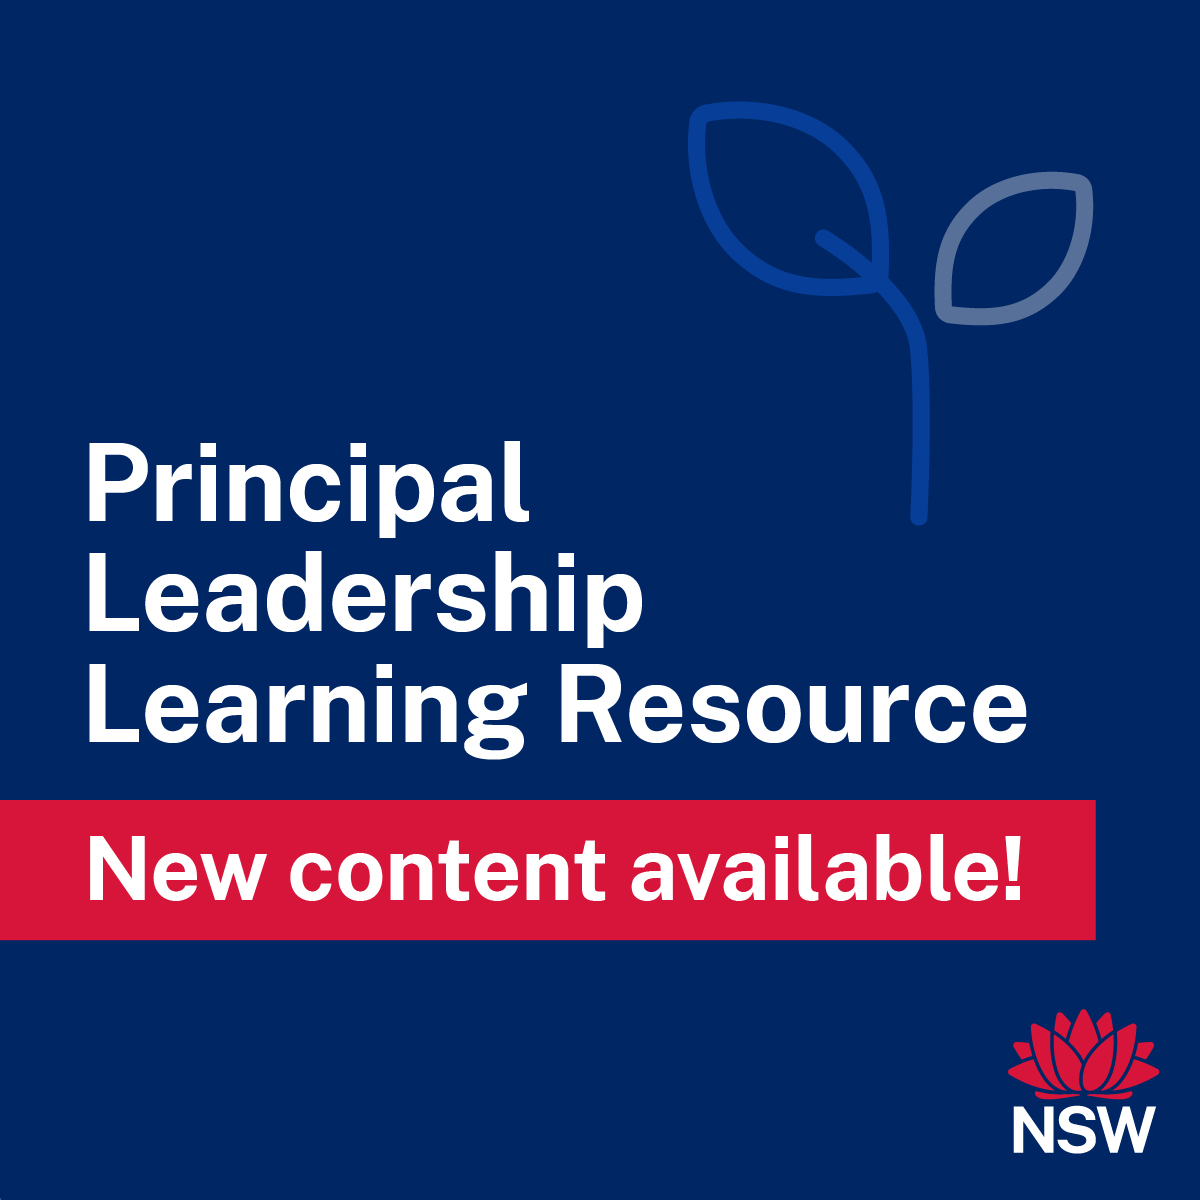 Our PLL Resource March update includes a new paper written for the SLI by Jenni Donohoo on Leadership for Teacher Collective Efficacy. This will be of great value to the work of school leaders and their teams. Go to the What’s New? tile to learn more: tinyurl.com/2hxxft92